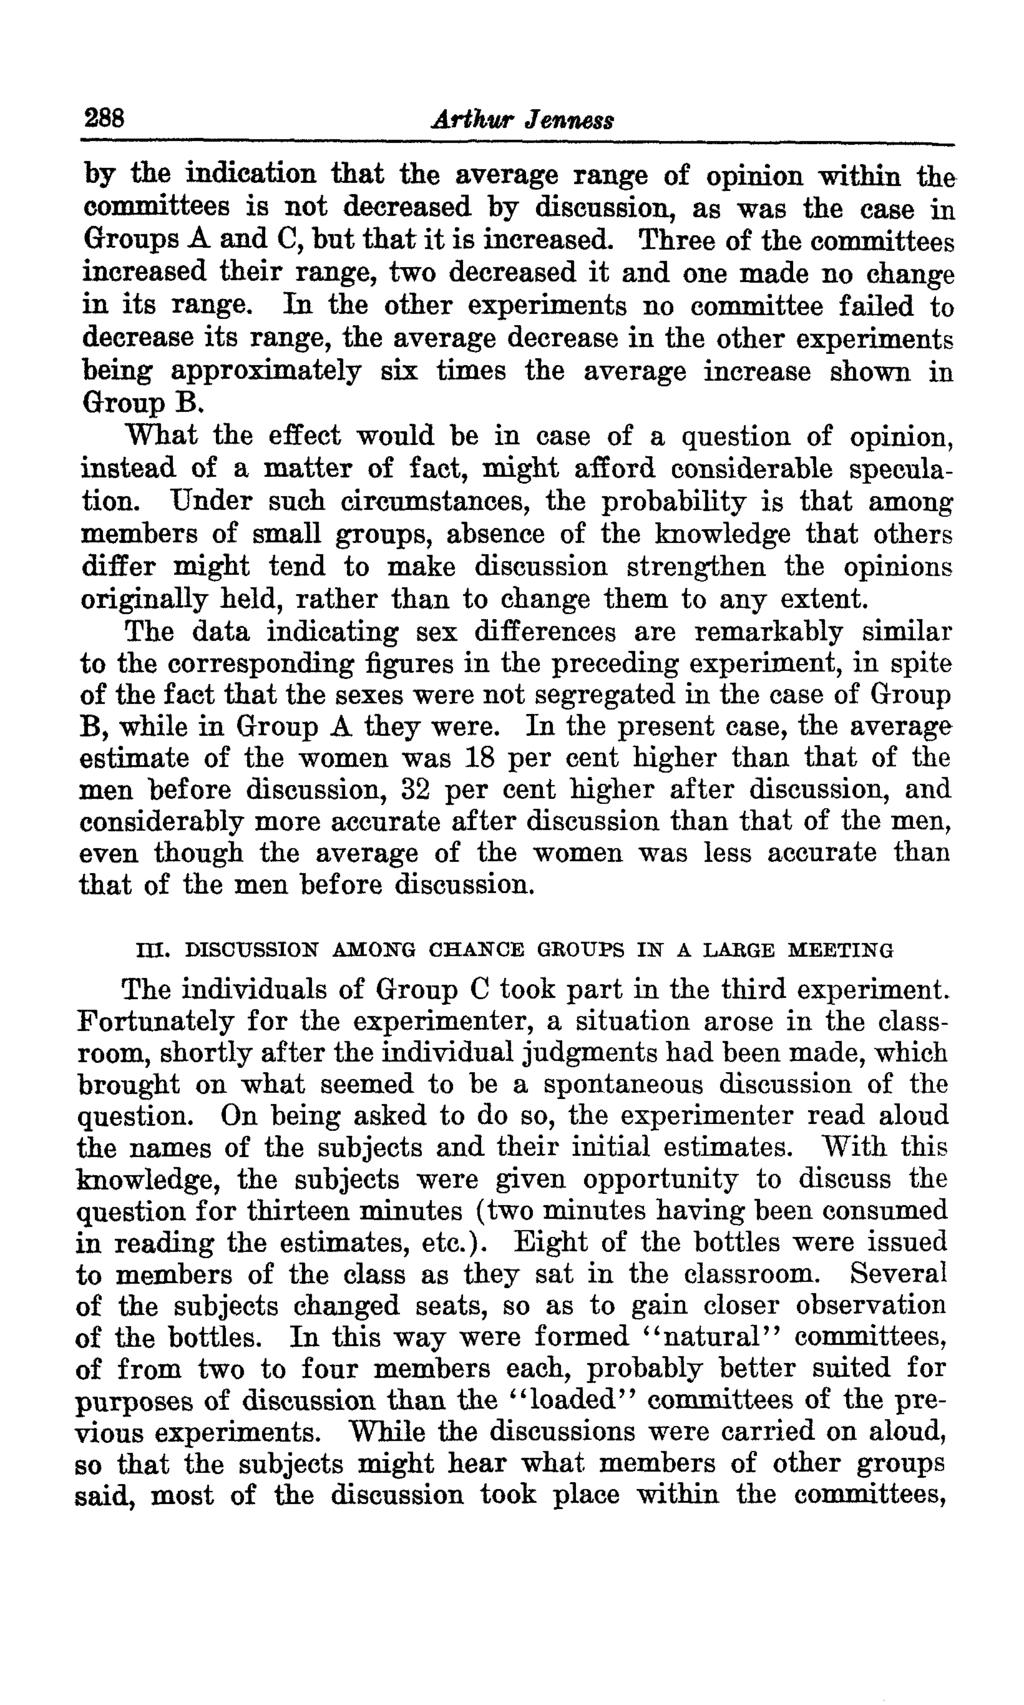 288 Arthur Jenness by the indication that the average range of opinion within the committees is not decreased by discussion, as was the case in Groups A and C, but that it is increased.